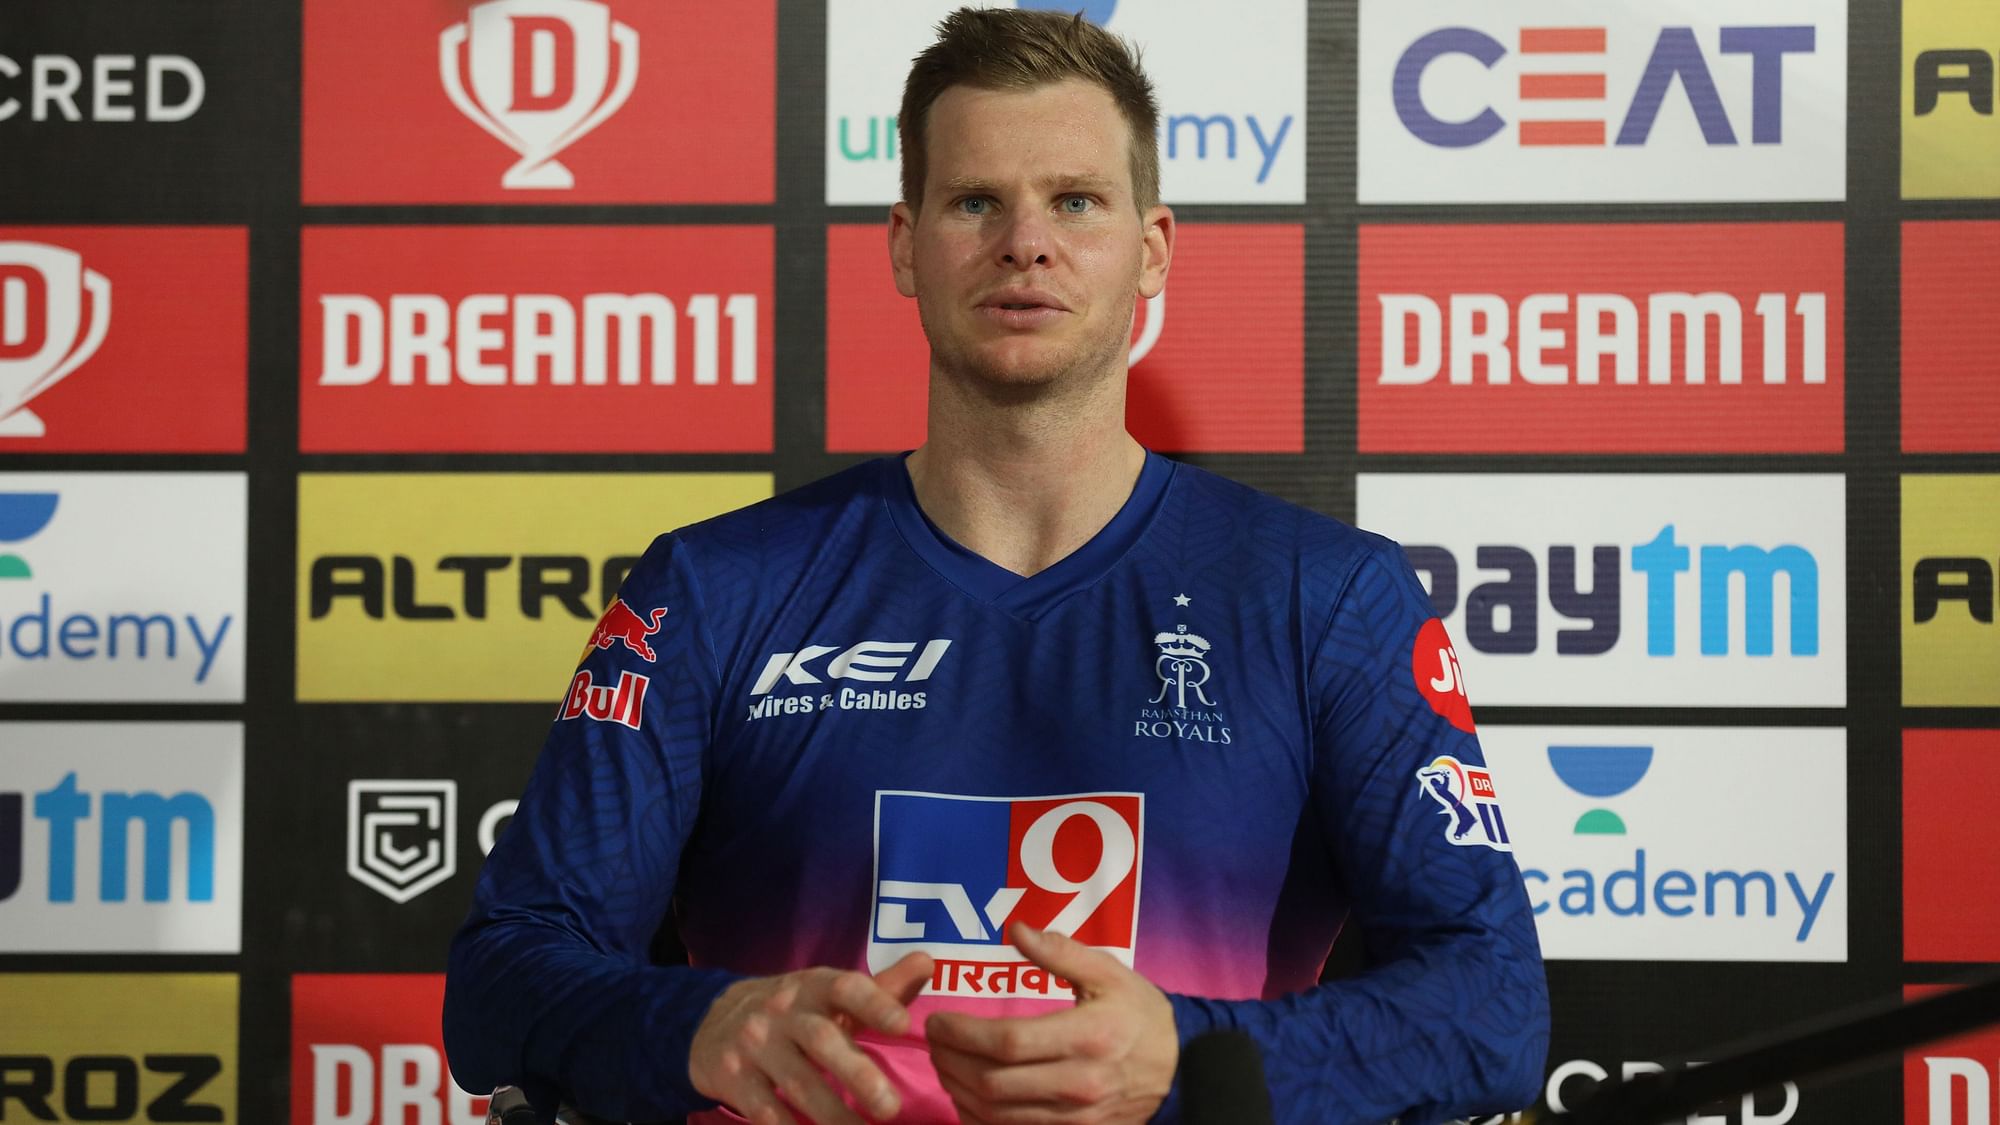 Steve Smith also talked about team’s combination when Jos Buttler arrives in the next game